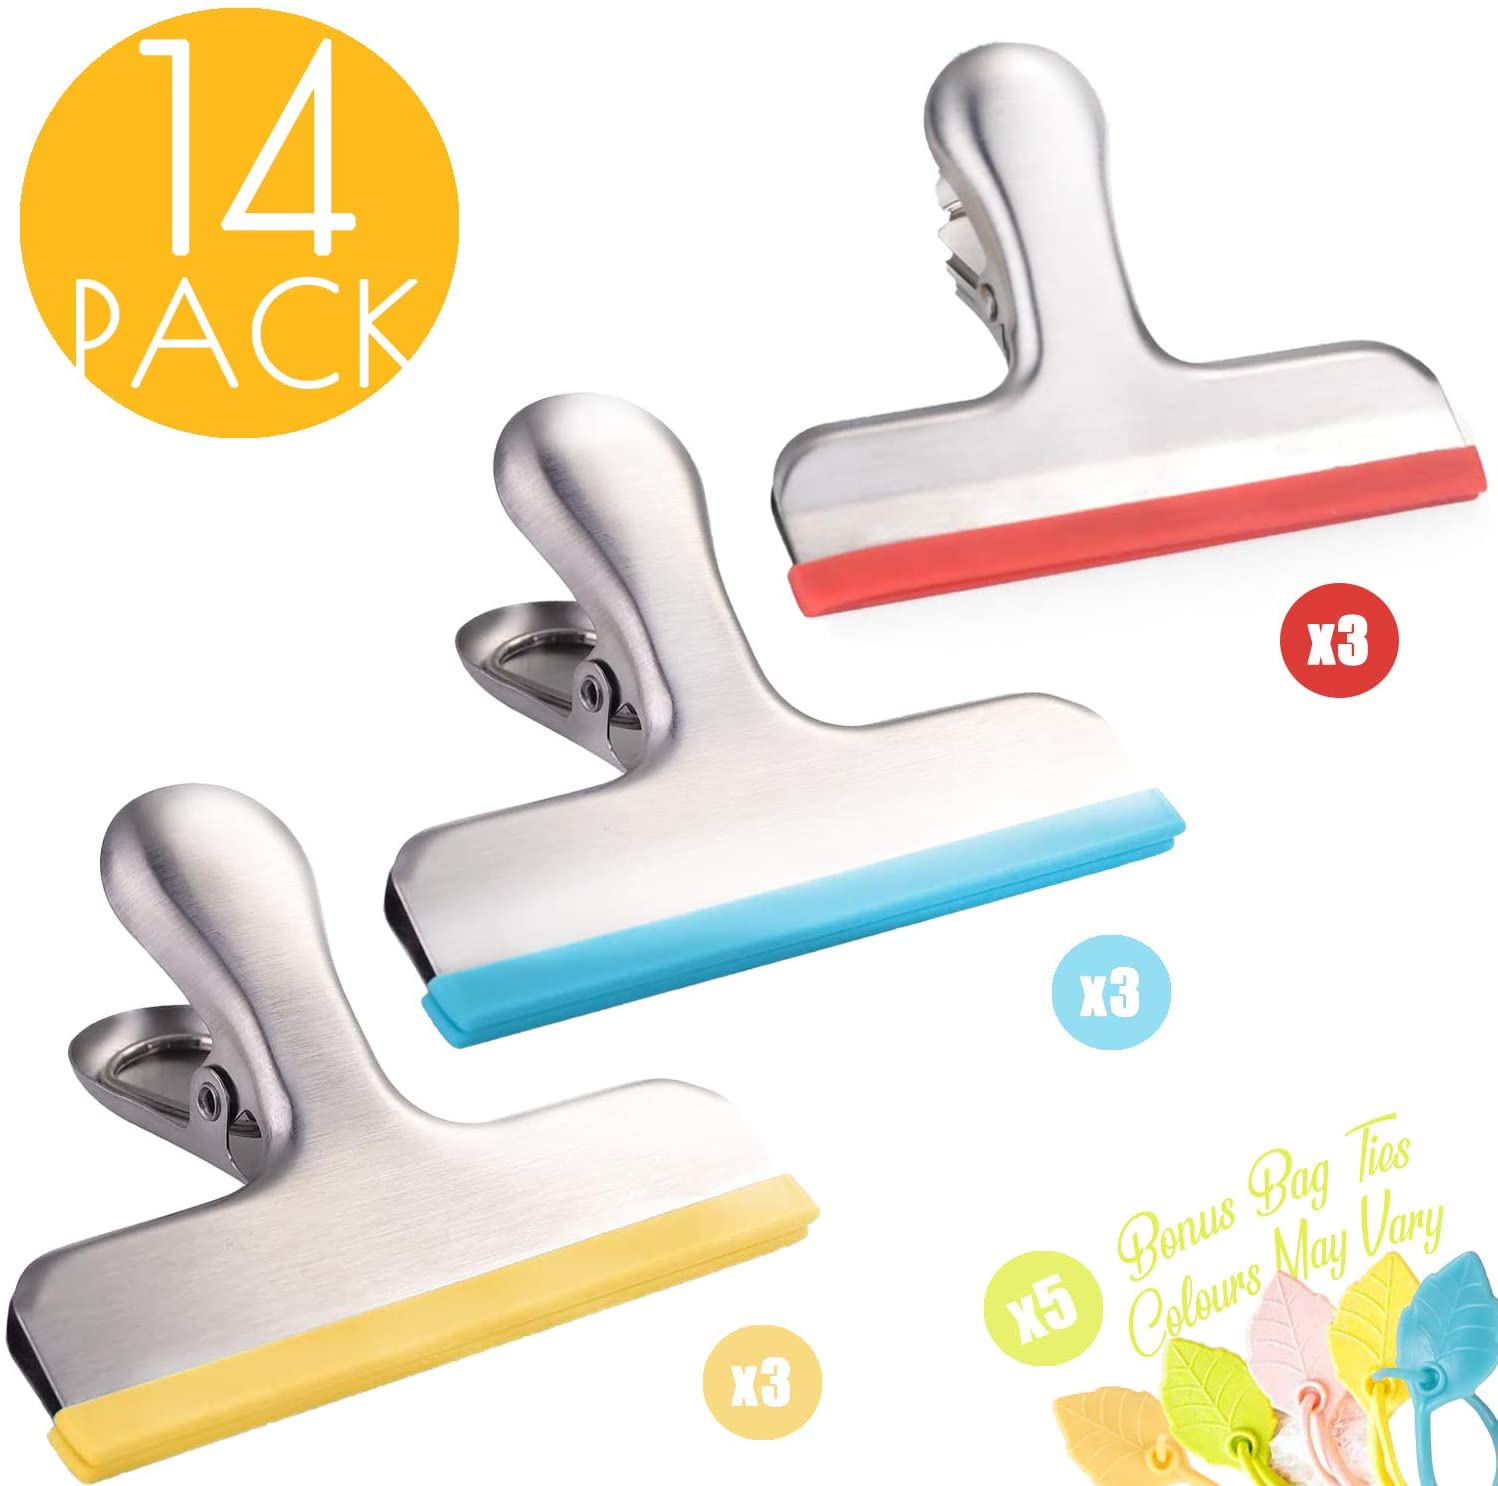 Details about   NEW HEAVY 12 Pack Chip Bag Clips Covered with Silicone+Soft Edges+Color Coded US 